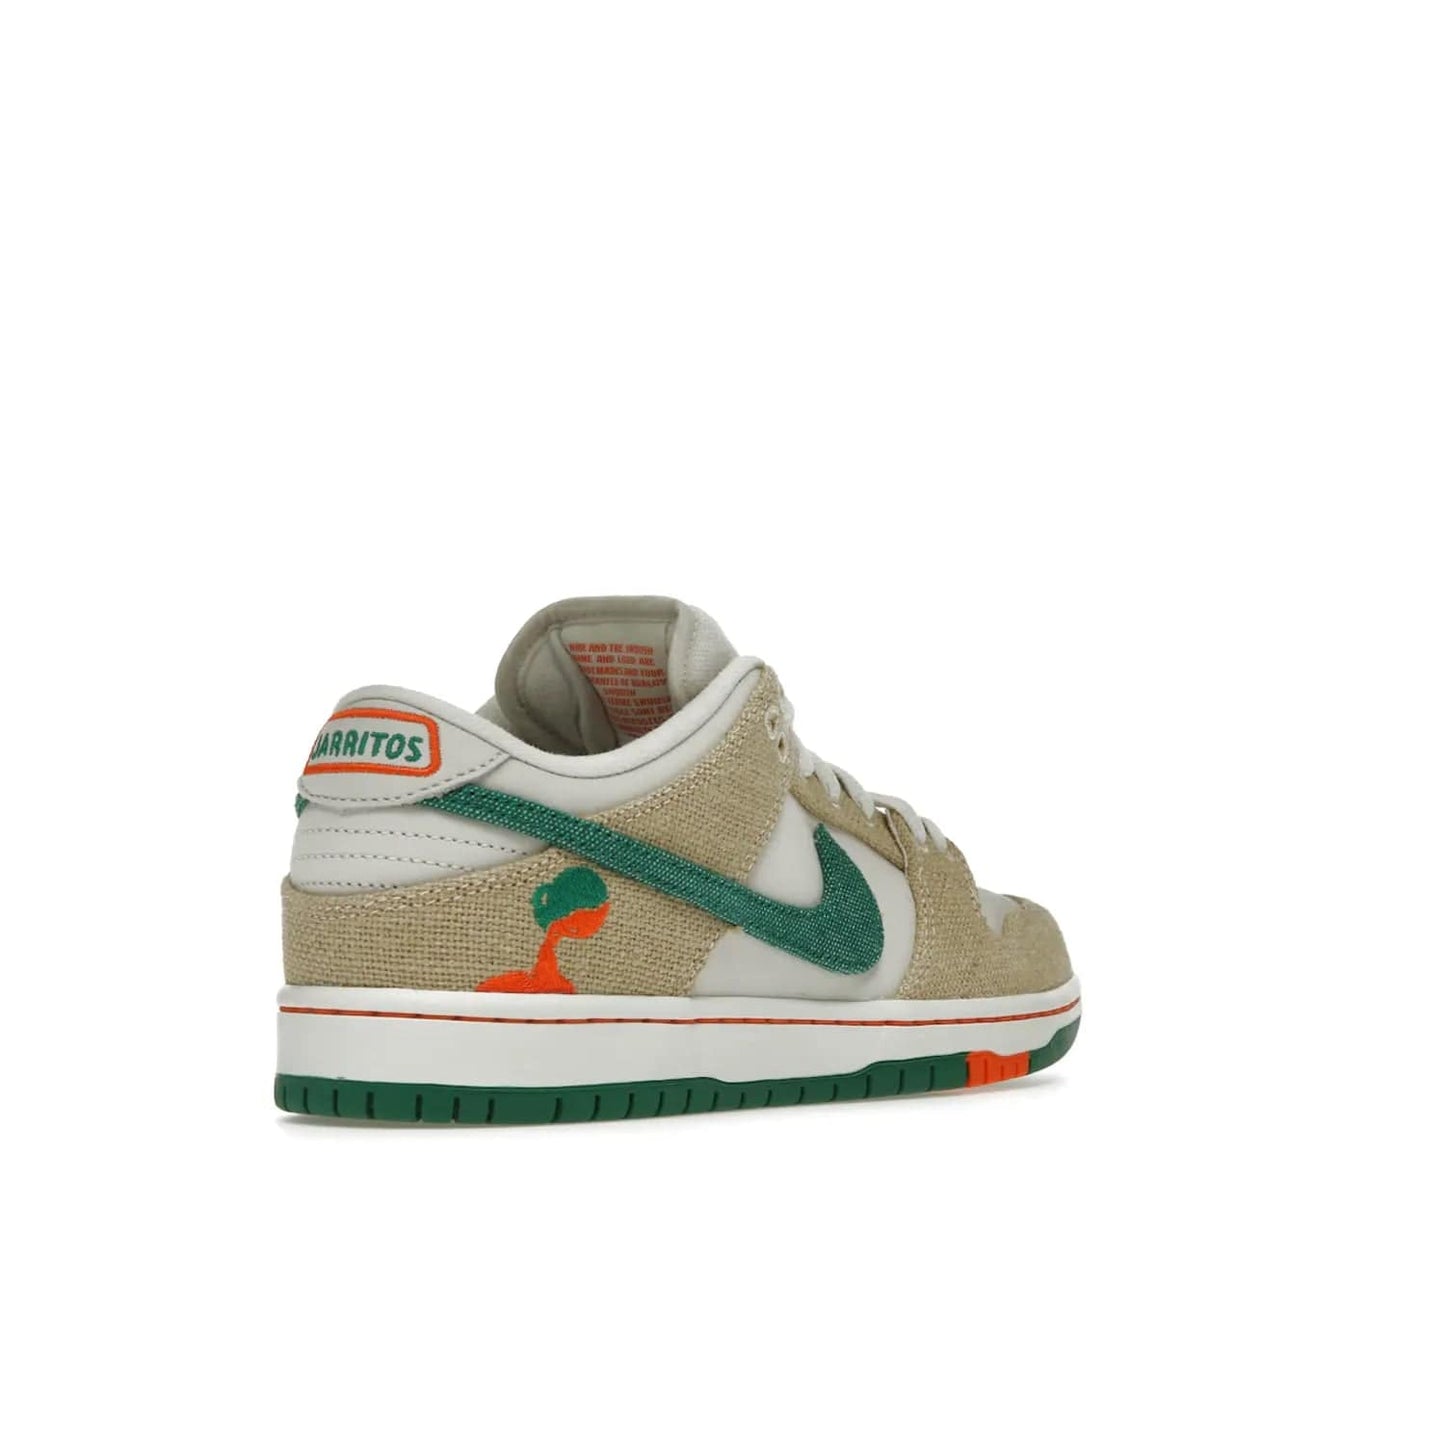 Nike SB Dunk Low Jarritos - Image 32 - Only at www.BallersClubKickz.com - Shop limited edition Nike SB Dunk Low Jarritos! Crafted with white leather and tear-away canvas materials with green accents. Includes orange, green, and white laces to customize your look. Available now.